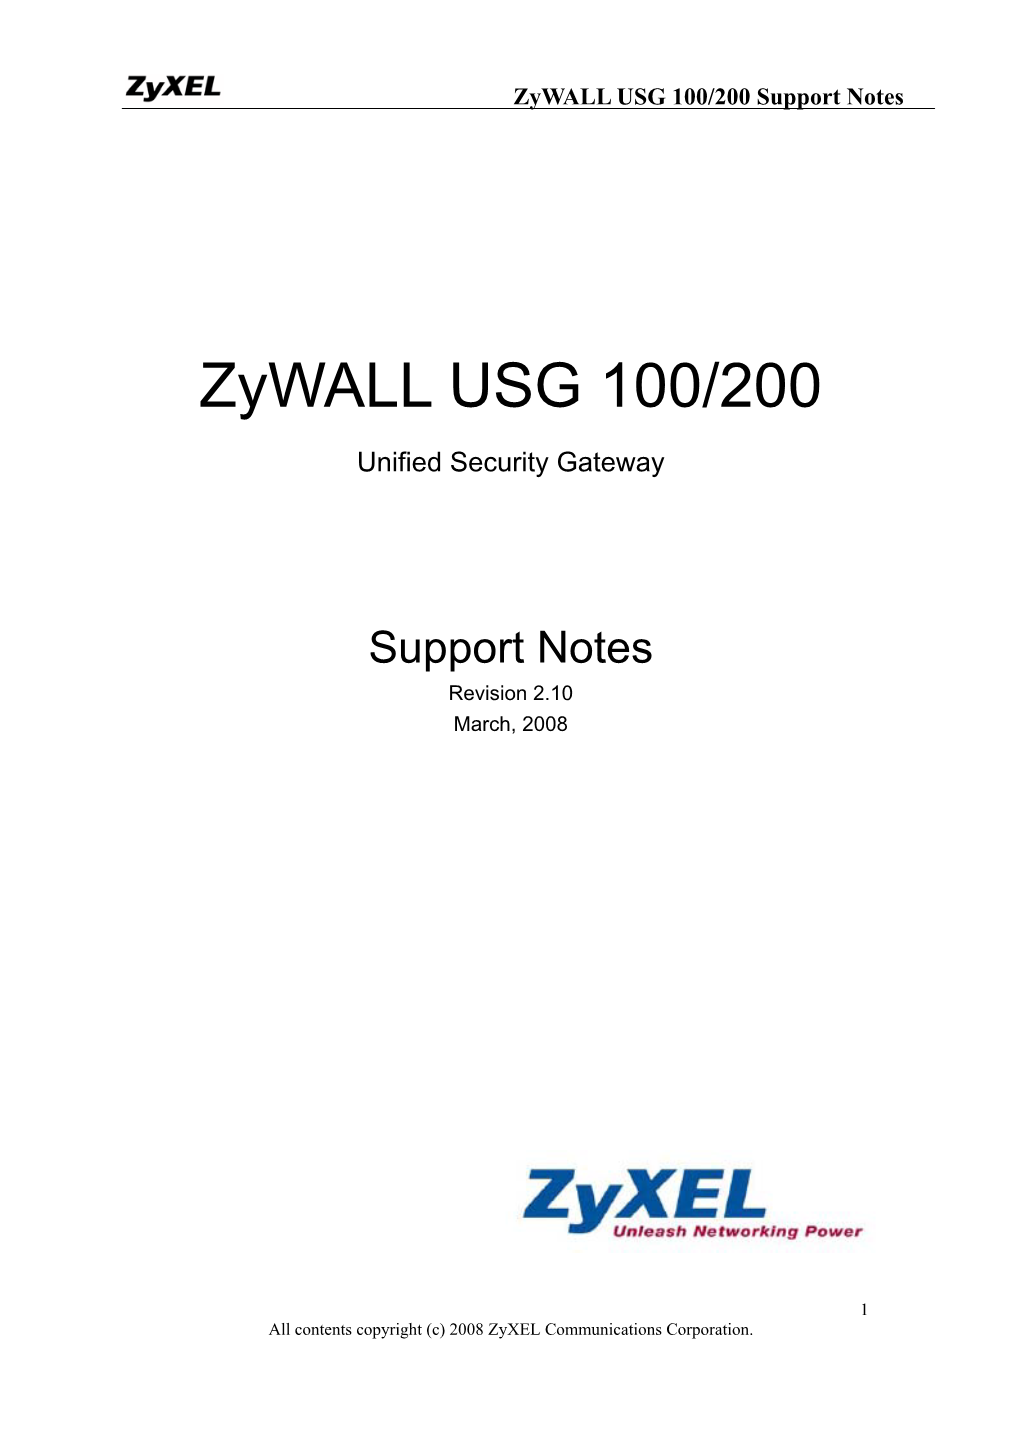 Zywall USG 100/200 Support Notes